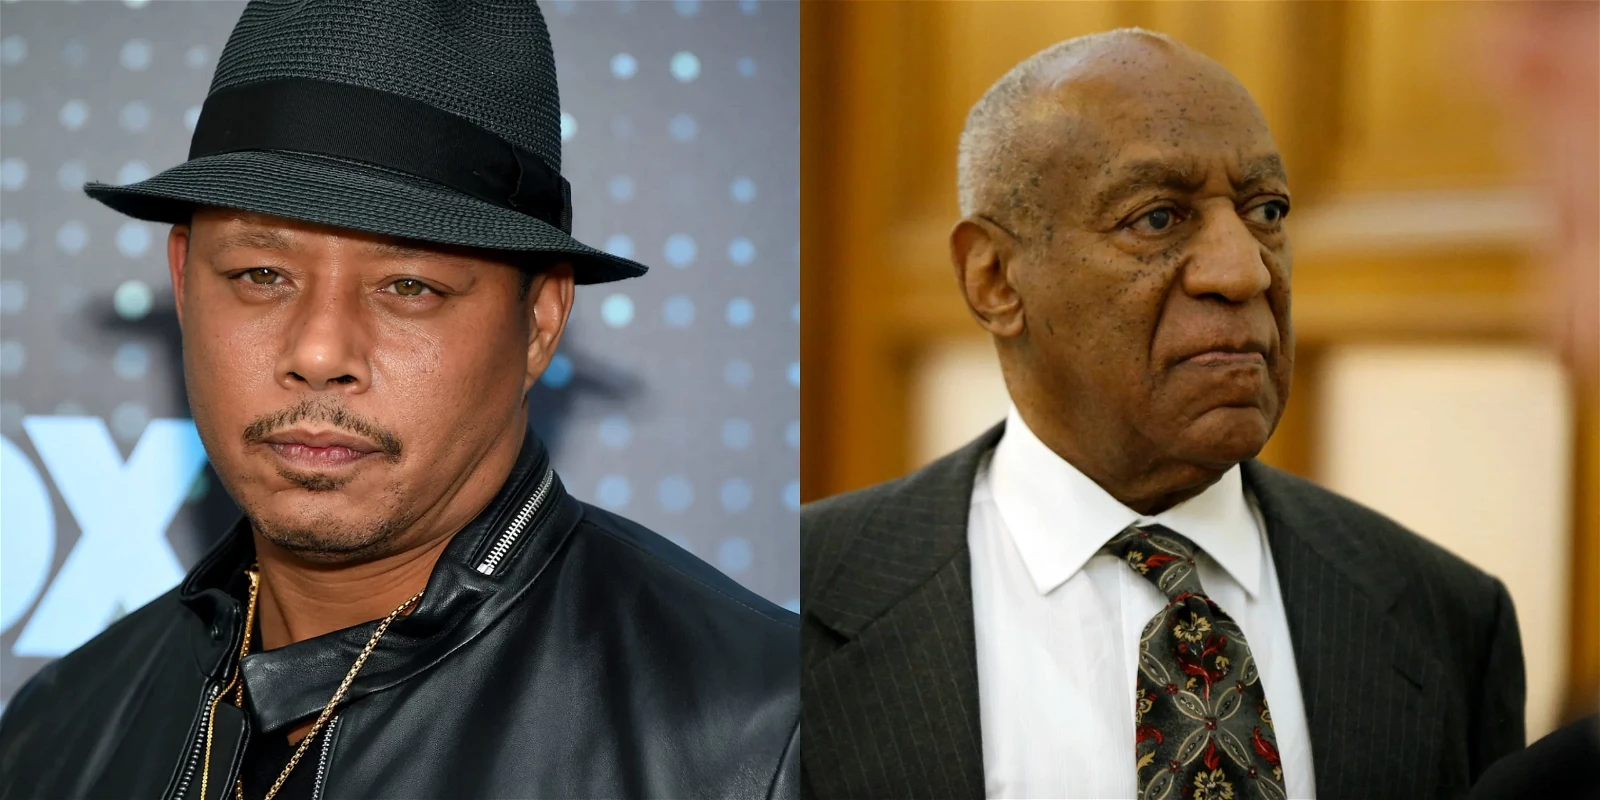 Terrence Howard and Bill Cosby